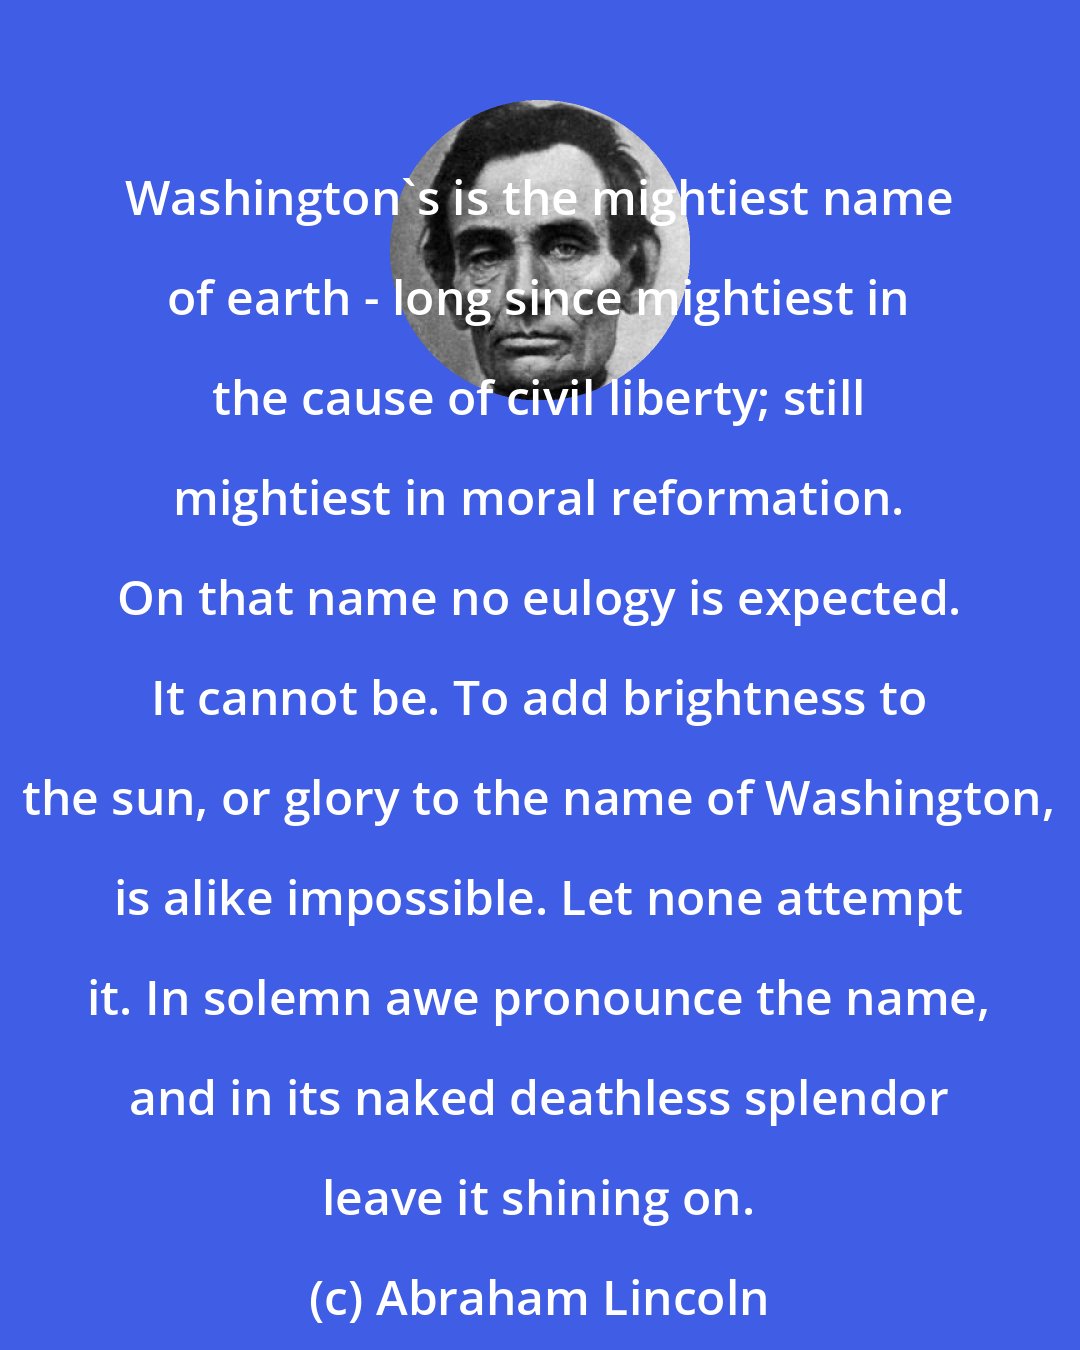 Abraham Lincoln: Washington's is the mightiest name of earth - long since mightiest in the cause of civil liberty; still mightiest in moral reformation. On that name no eulogy is expected. It cannot be. To add brightness to the sun, or glory to the name of Washington, is alike impossible. Let none attempt it. In solemn awe pronounce the name, and in its naked deathless splendor leave it shining on.